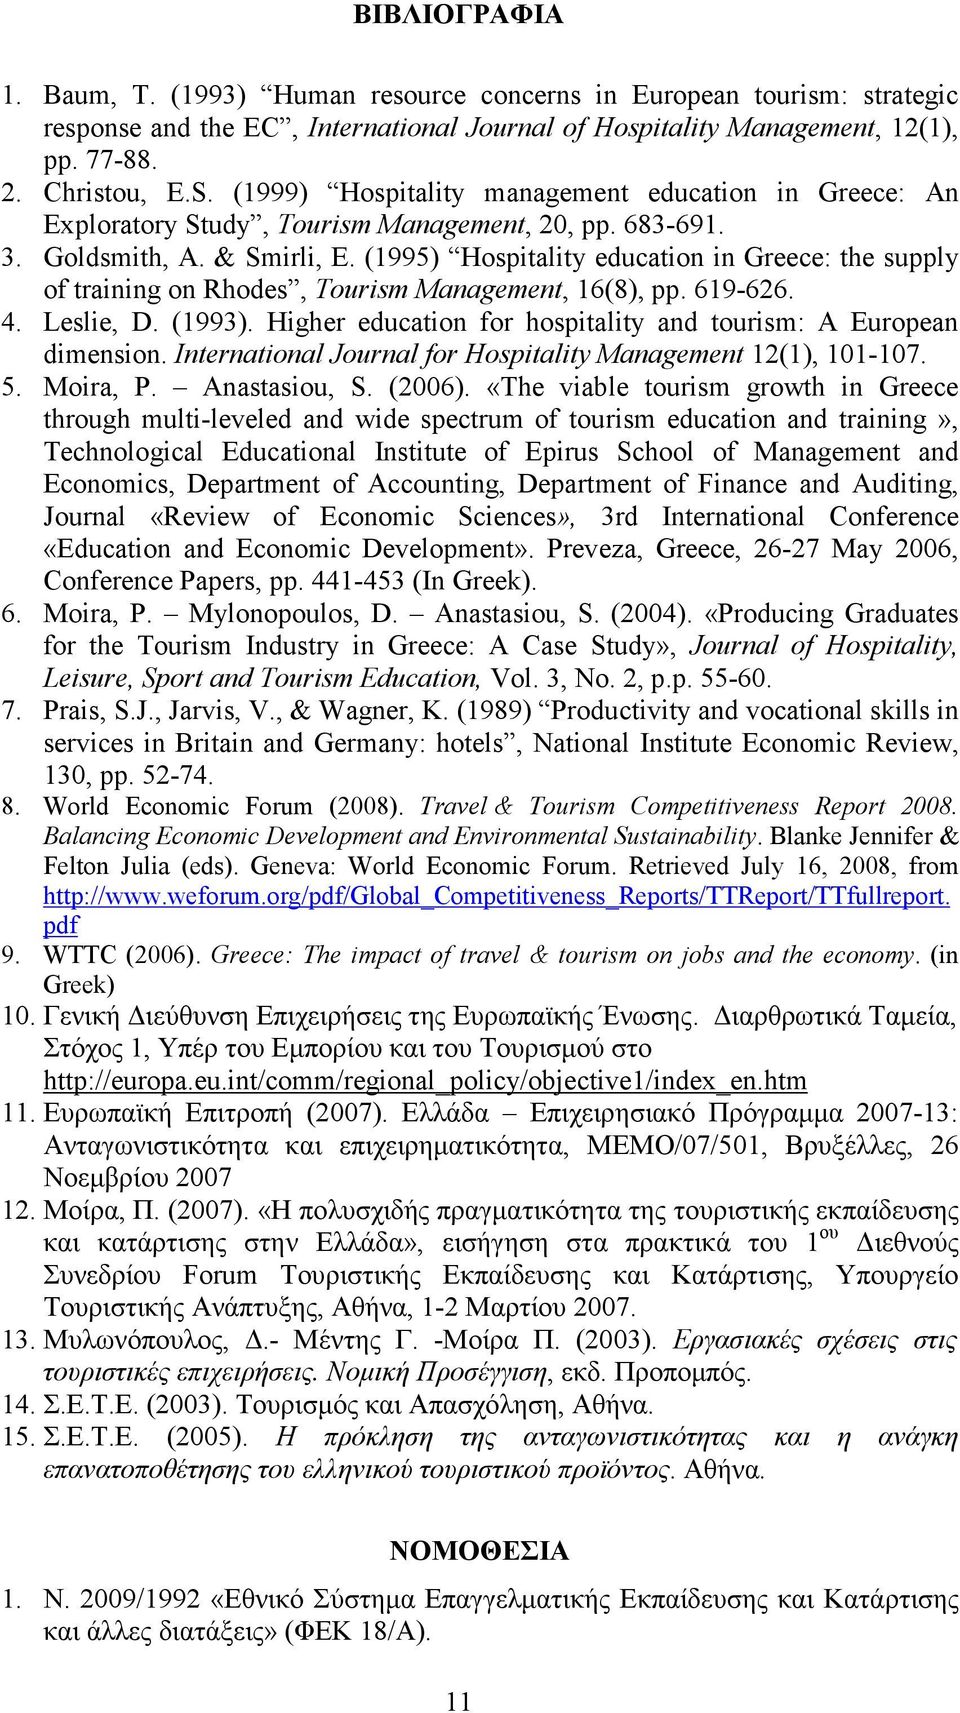 (1995) Hospitality education in Greece: the supply of training on Rhodes, Tourism Management, 16(8), pp. 619-626. 4. Leslie, D. (1993).